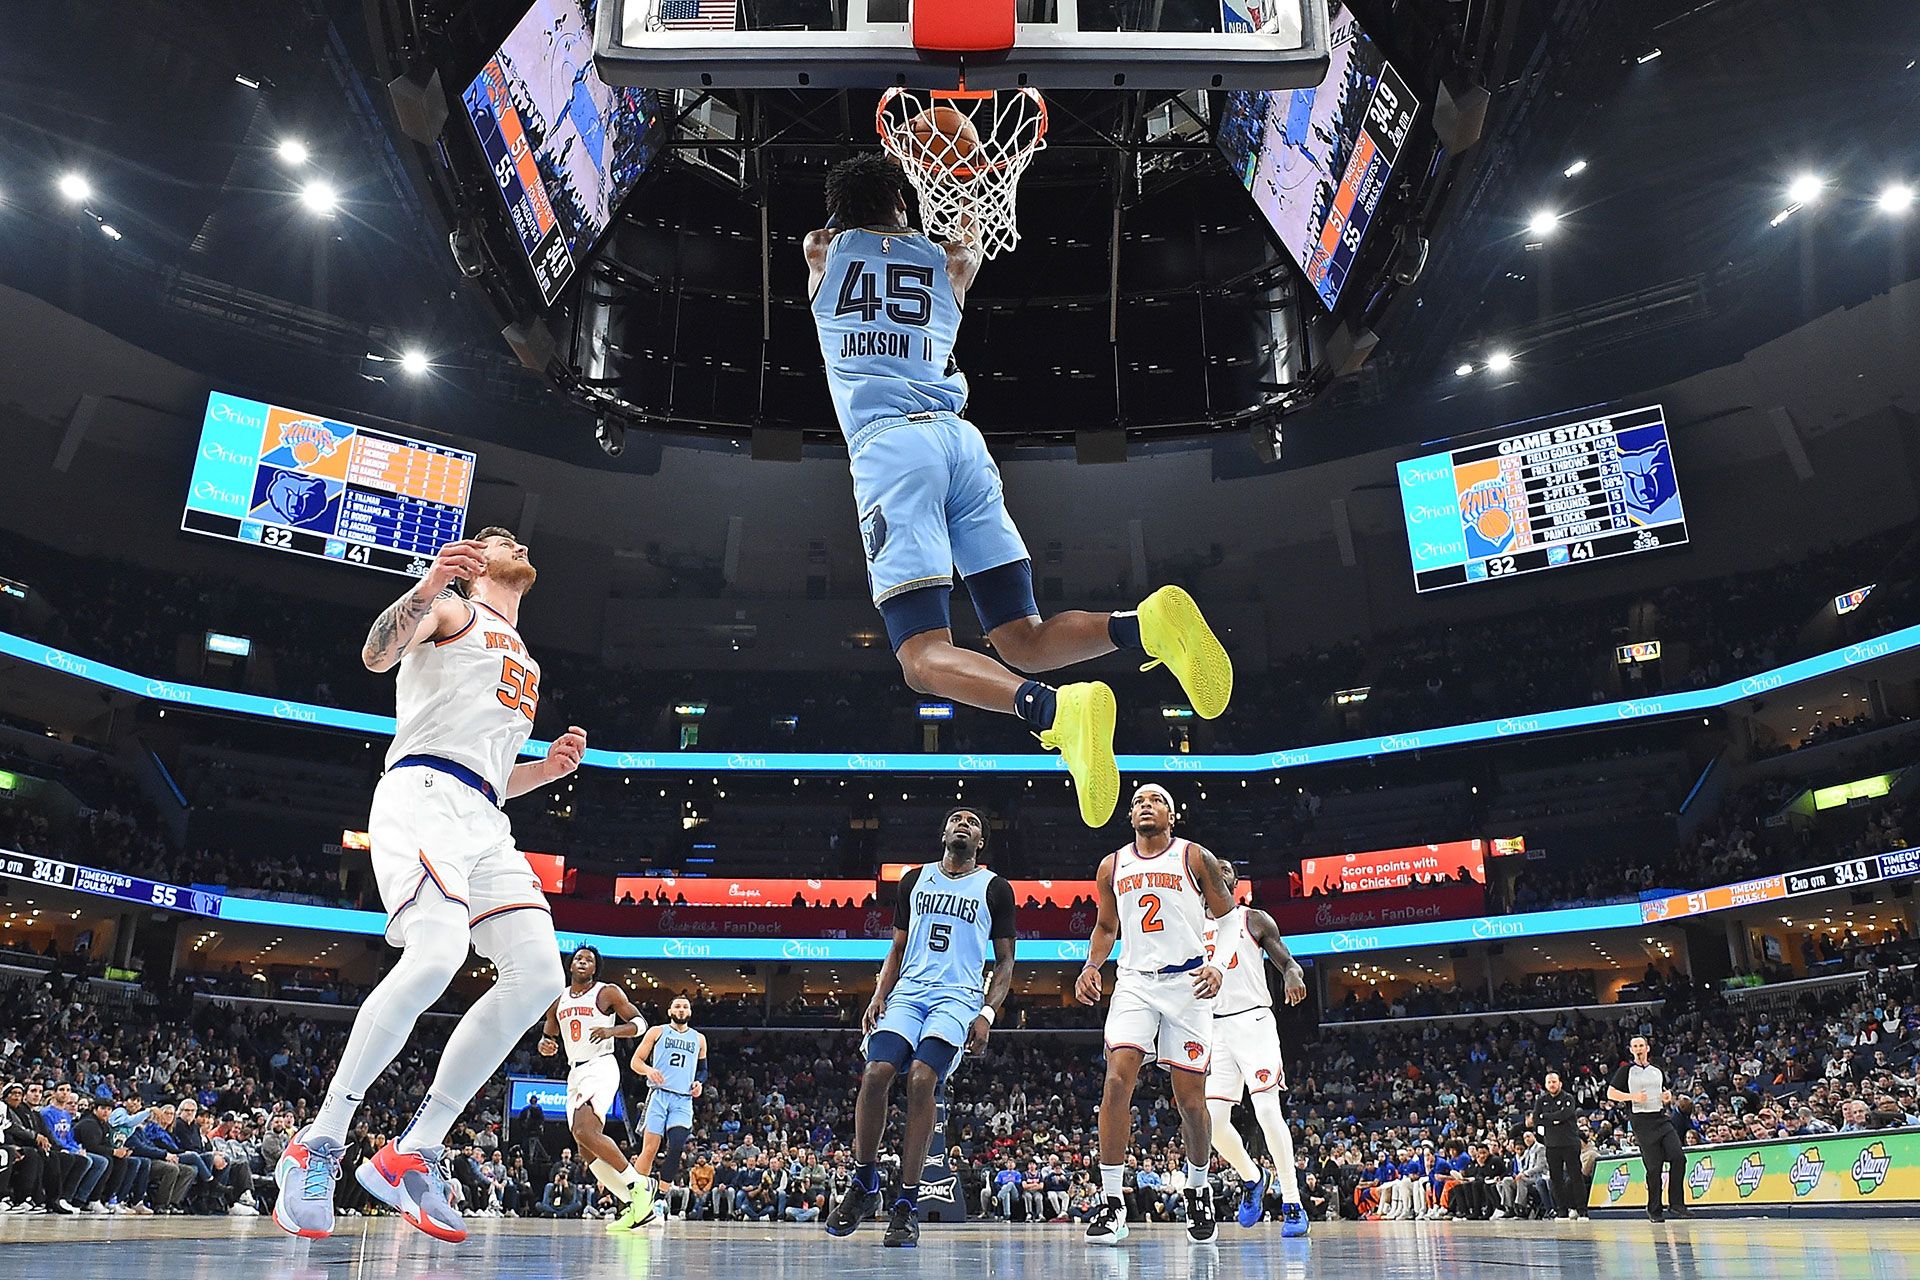 MEMPHIS, TENNESSEE - JANUARY 13: GG Jackson #45 of the Memphis Grizzlies goes to the basket during the game against the New York Knicks at FedExForum on January 13, 2024 in Memphis, Tennessee.